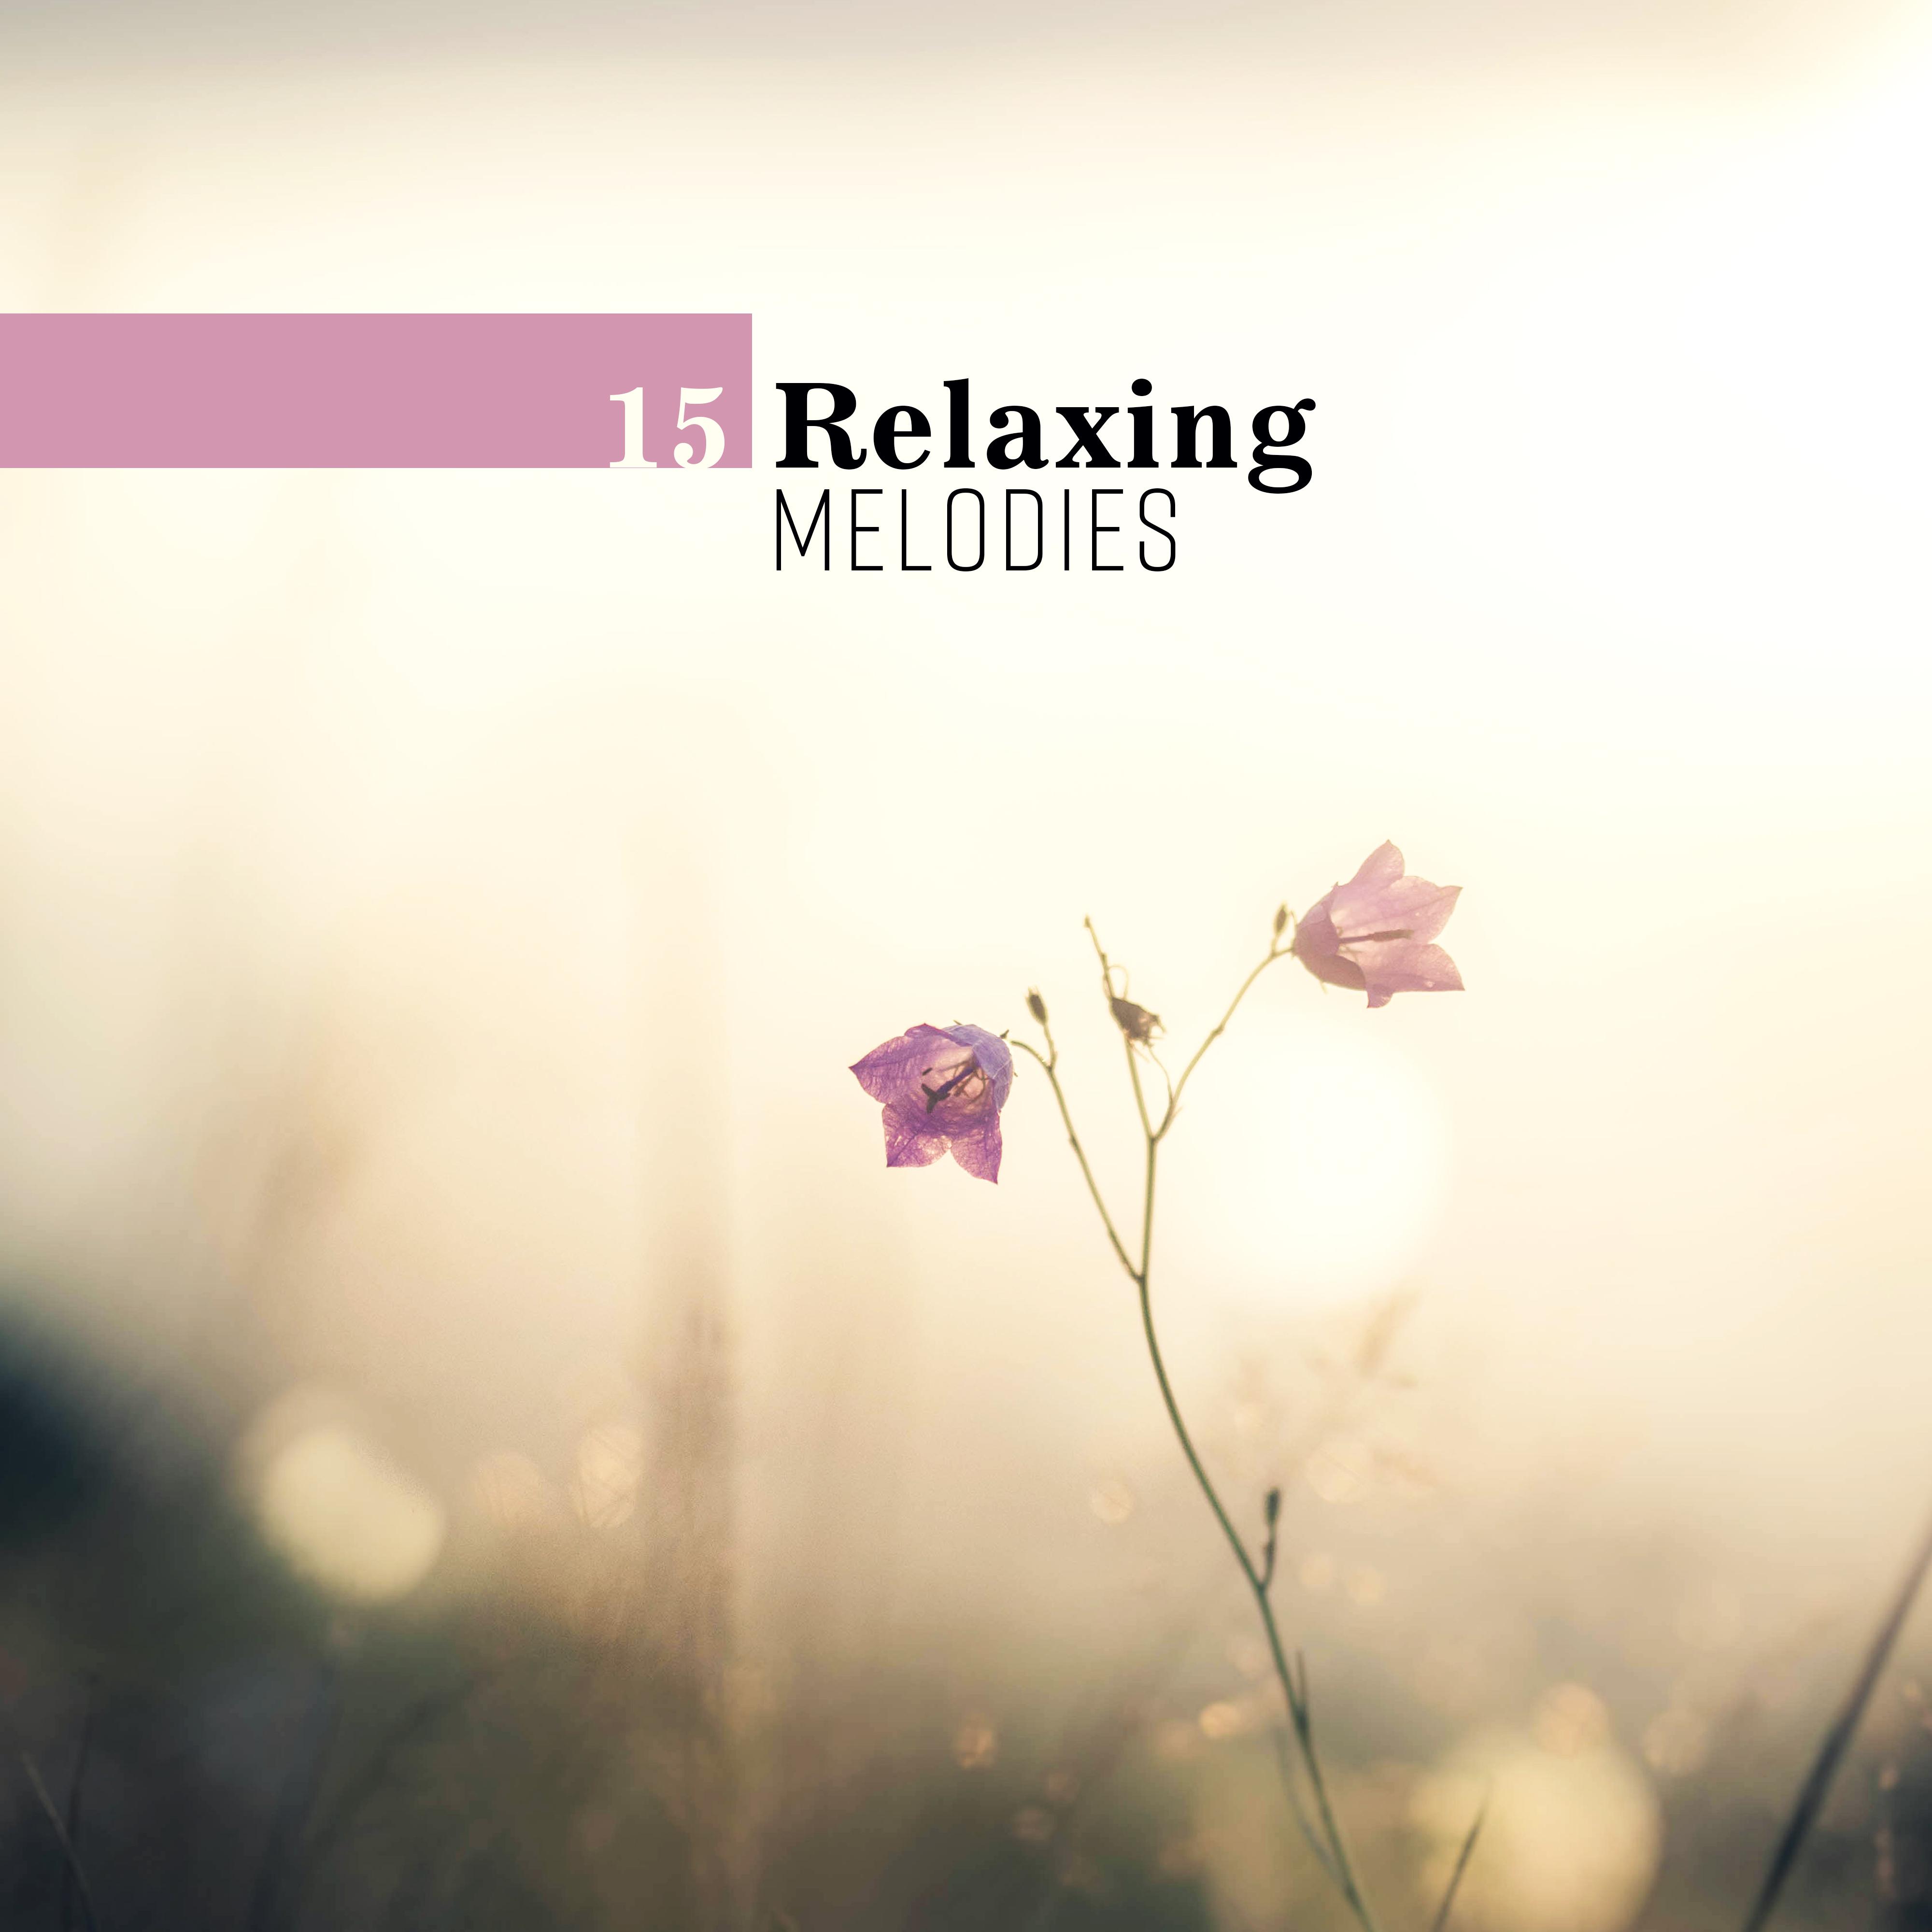 15 Relaxing Melodies